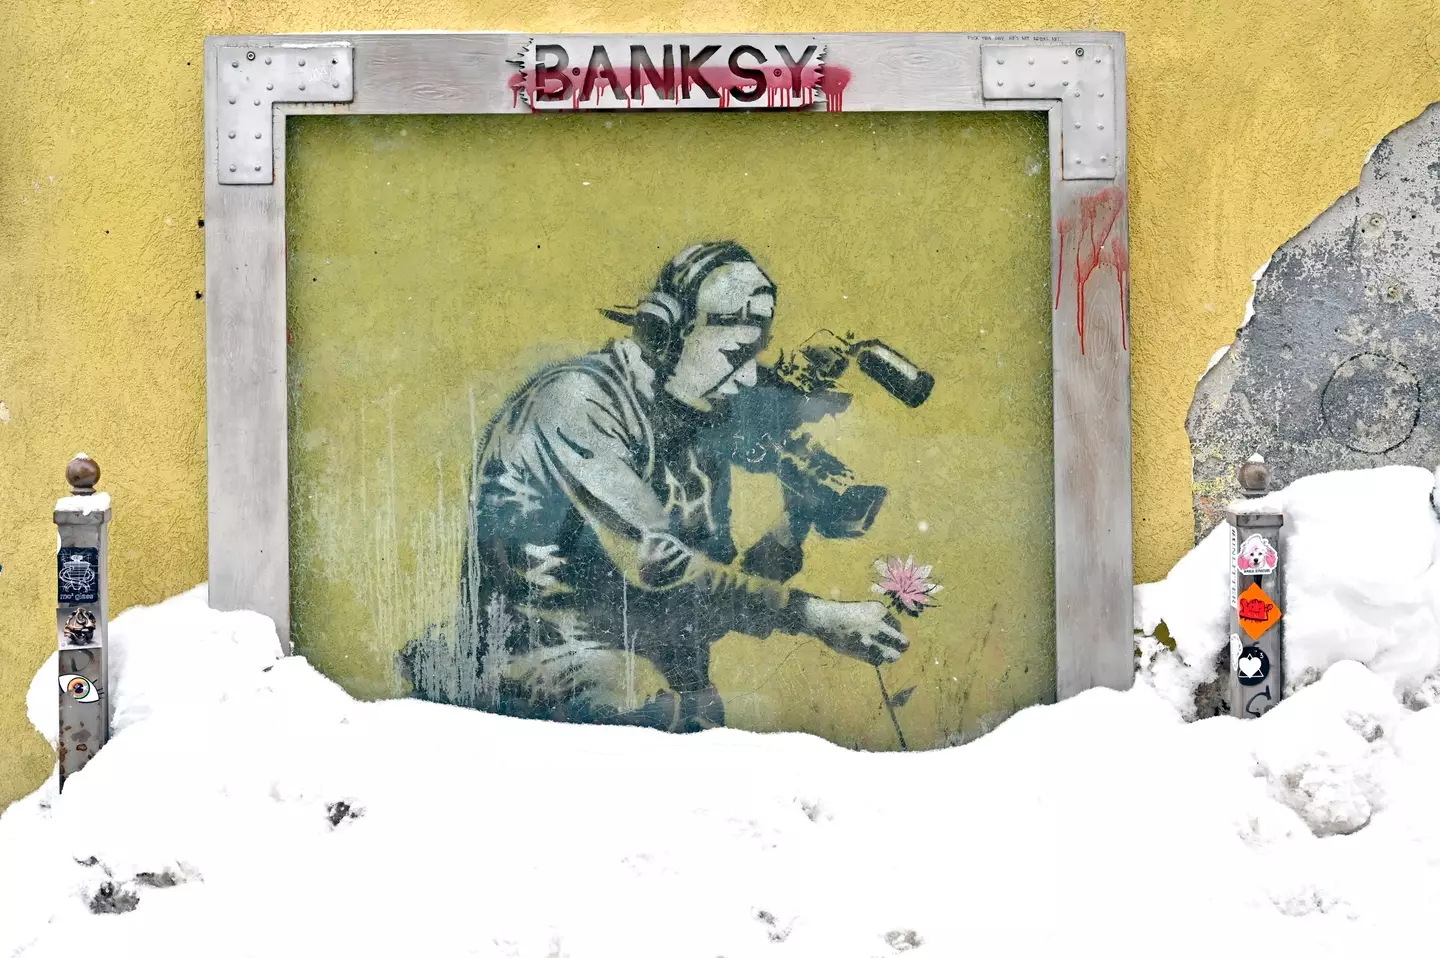 Banksy has created artwork all over the world.